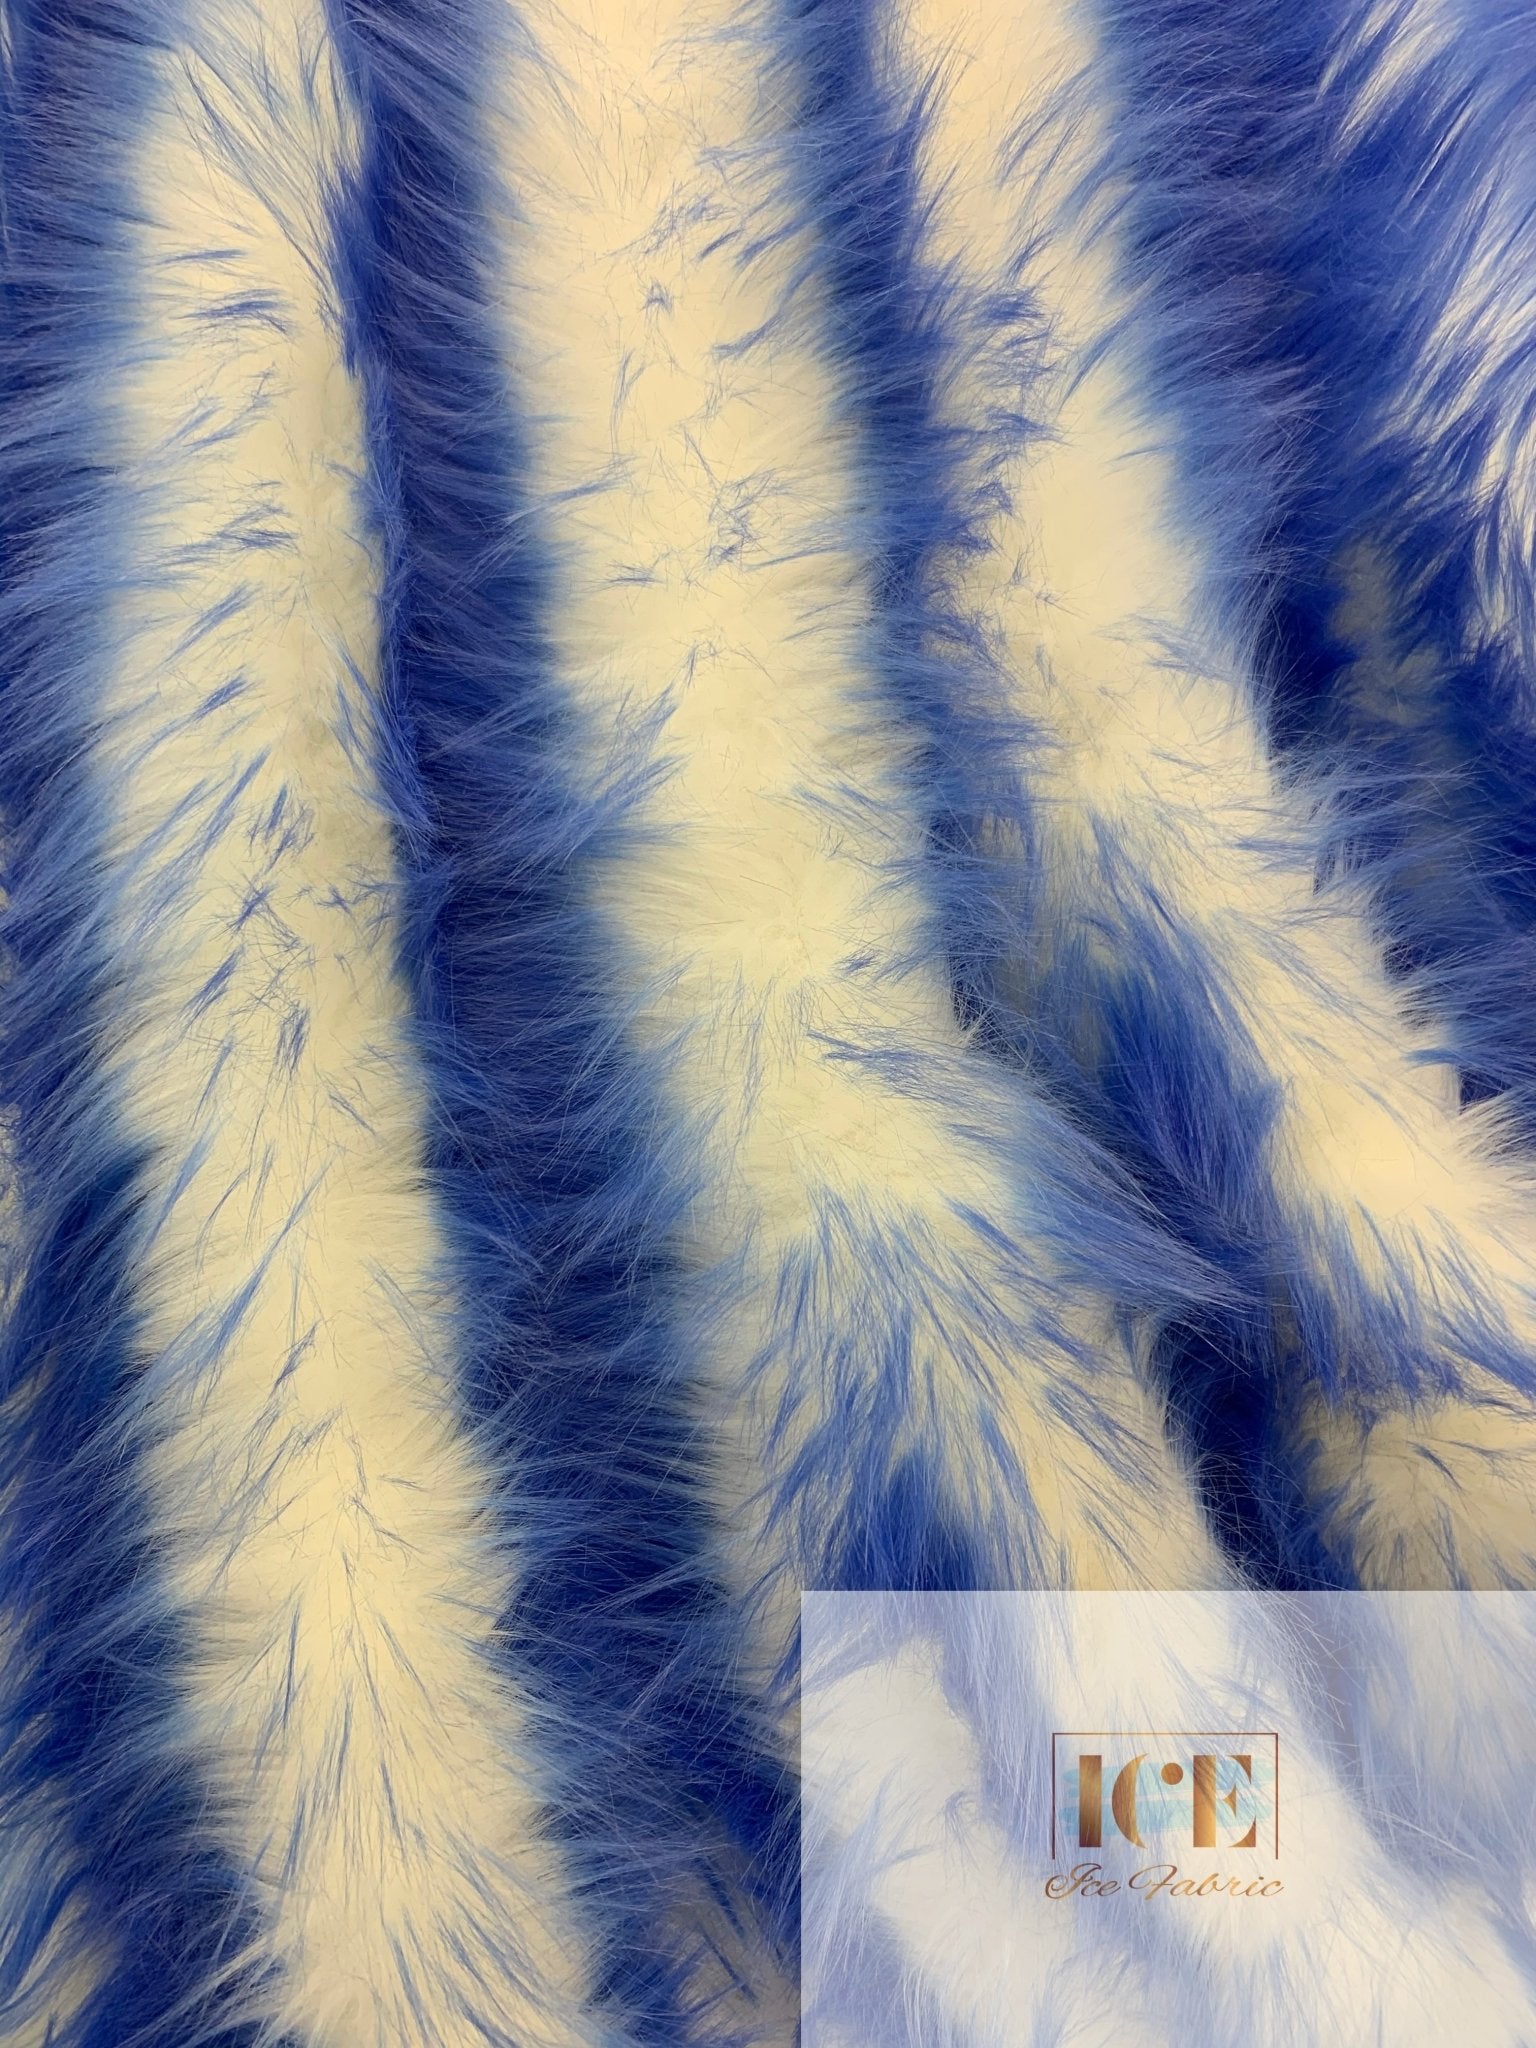 Canadian Fox 2 Tone Shaggy Long Pile Faux Fur Fabric For Blankets, Costumes, Bed SpreadICEFABRICICE FABRICSRoyal BlueBy The Yard (60 inches Wide)Canadian Fox 2 Tone Shaggy Long Pile Faux Fur Fabric For Blankets, Costumes, Bed Spread ICEFABRIC Royal Blue